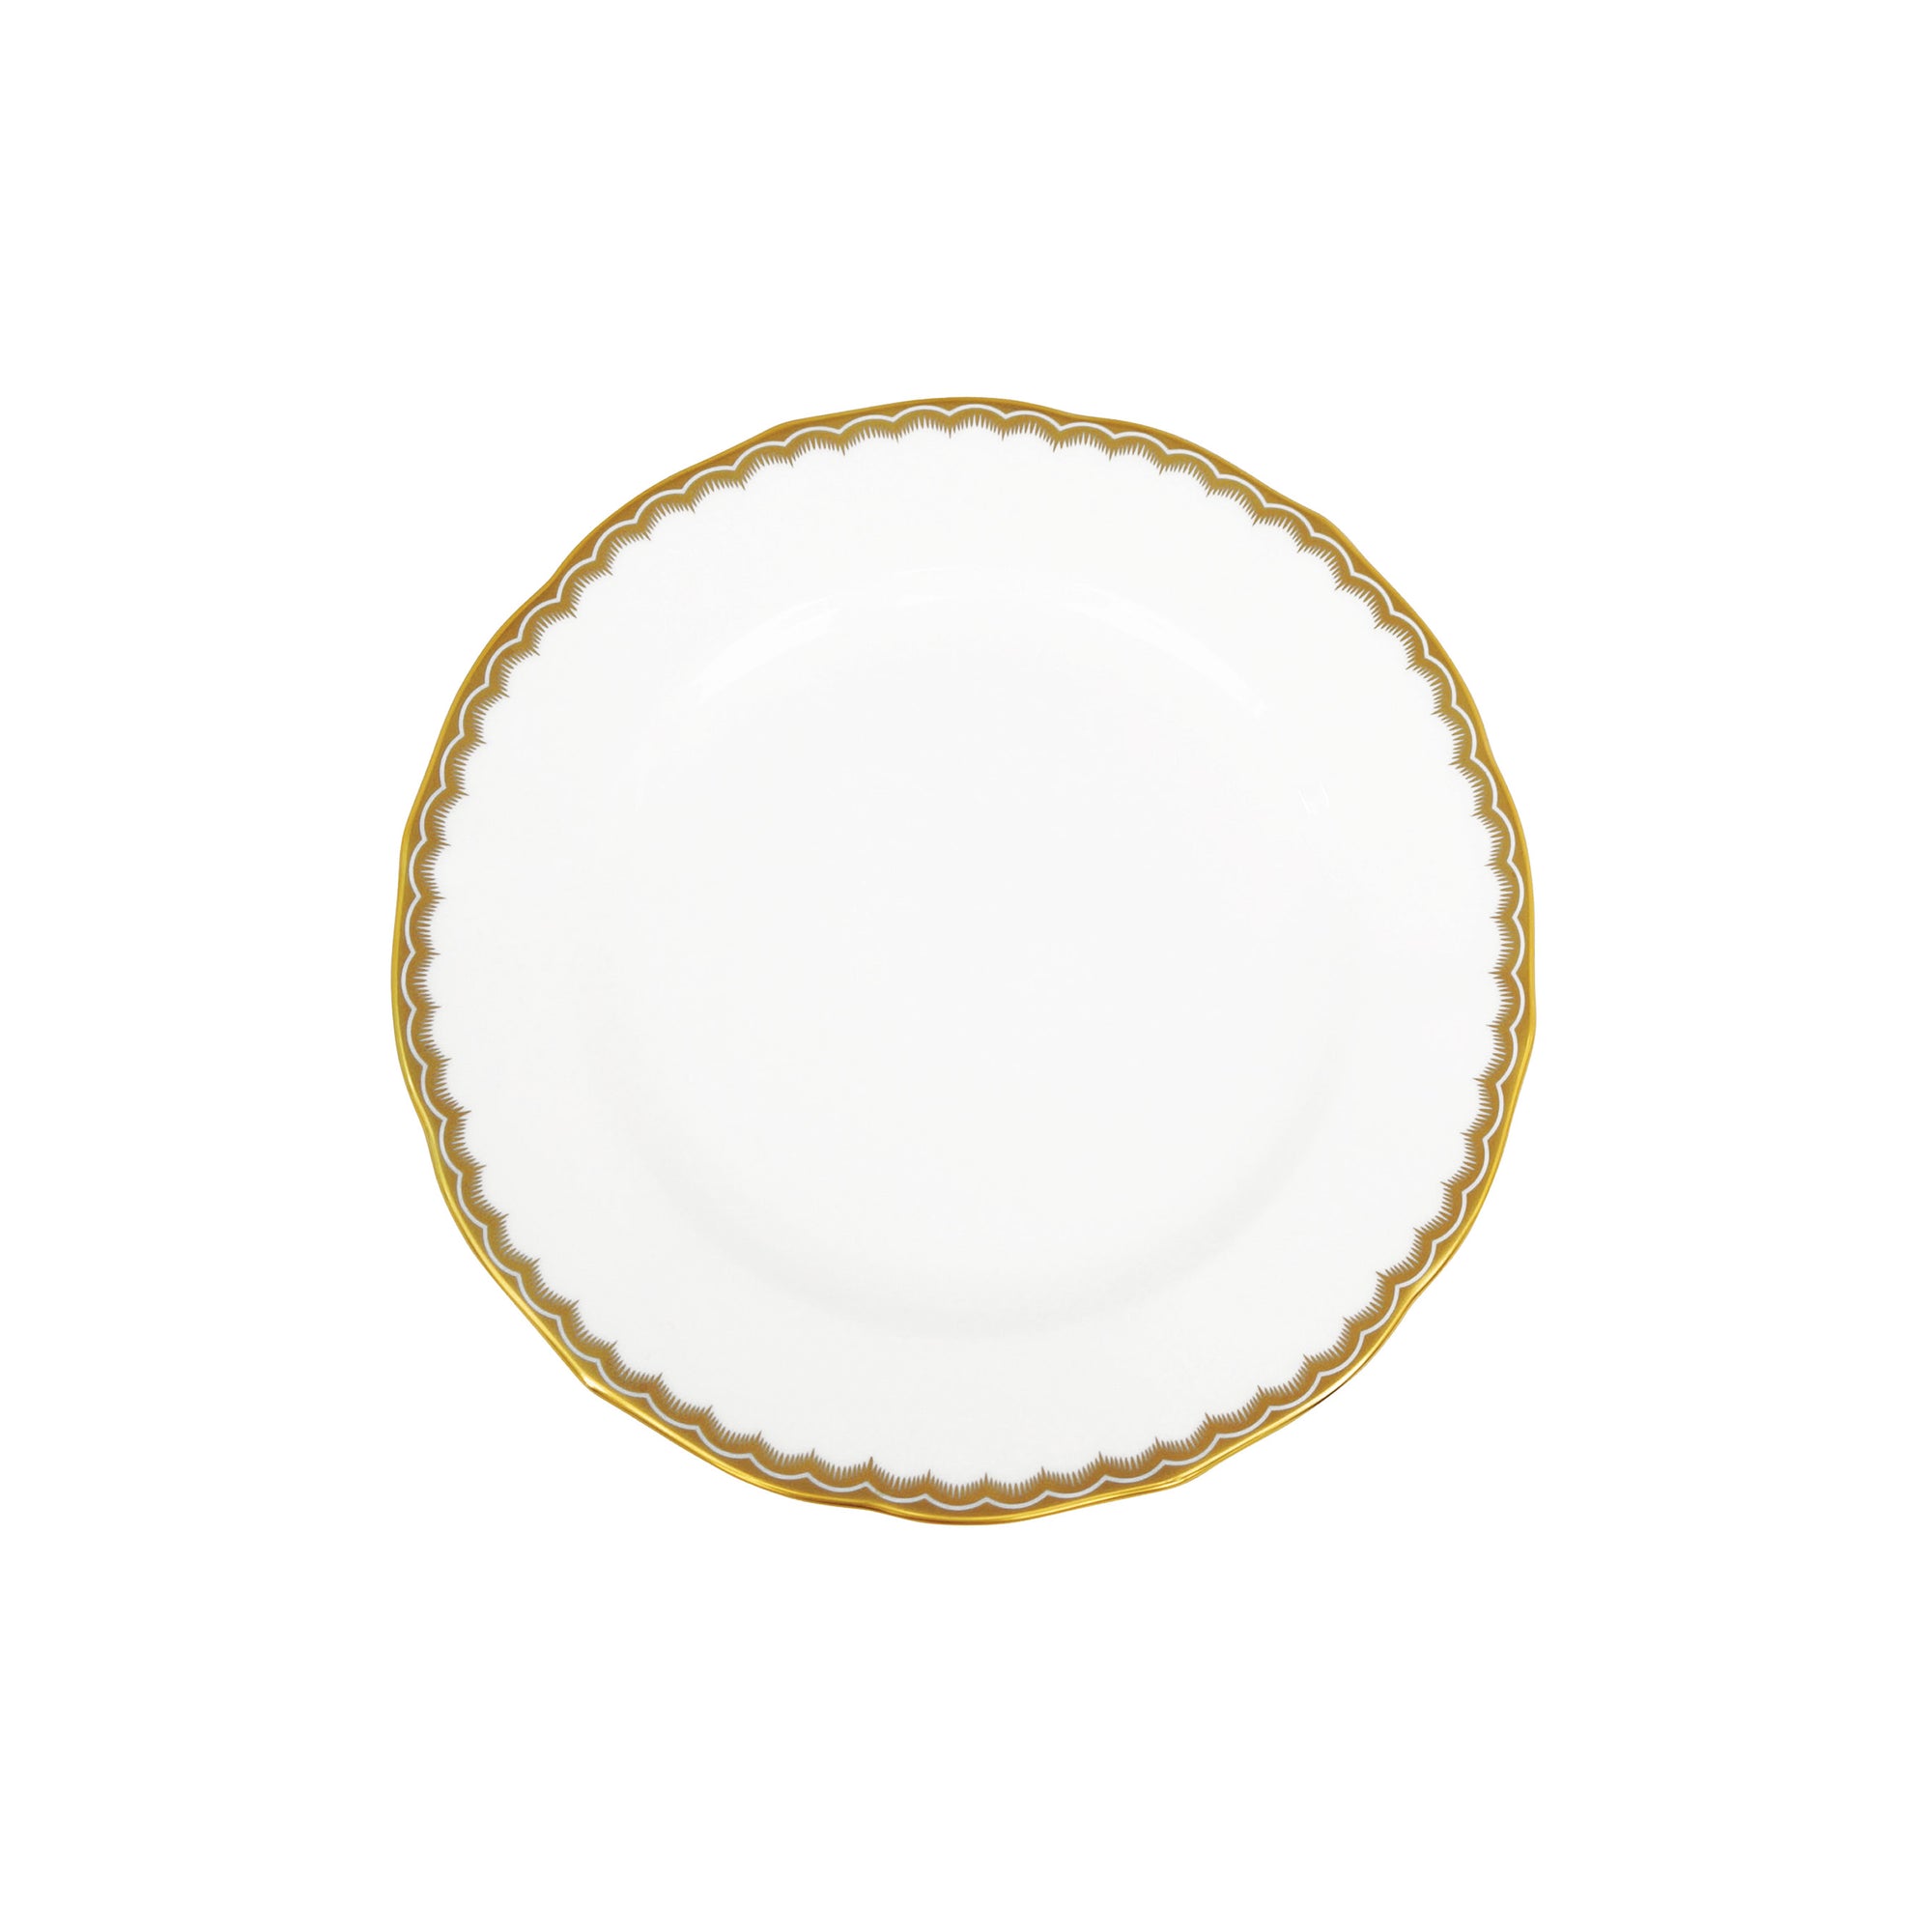 Prouna Antique Gold Bread & Butter Plate White Background Photo